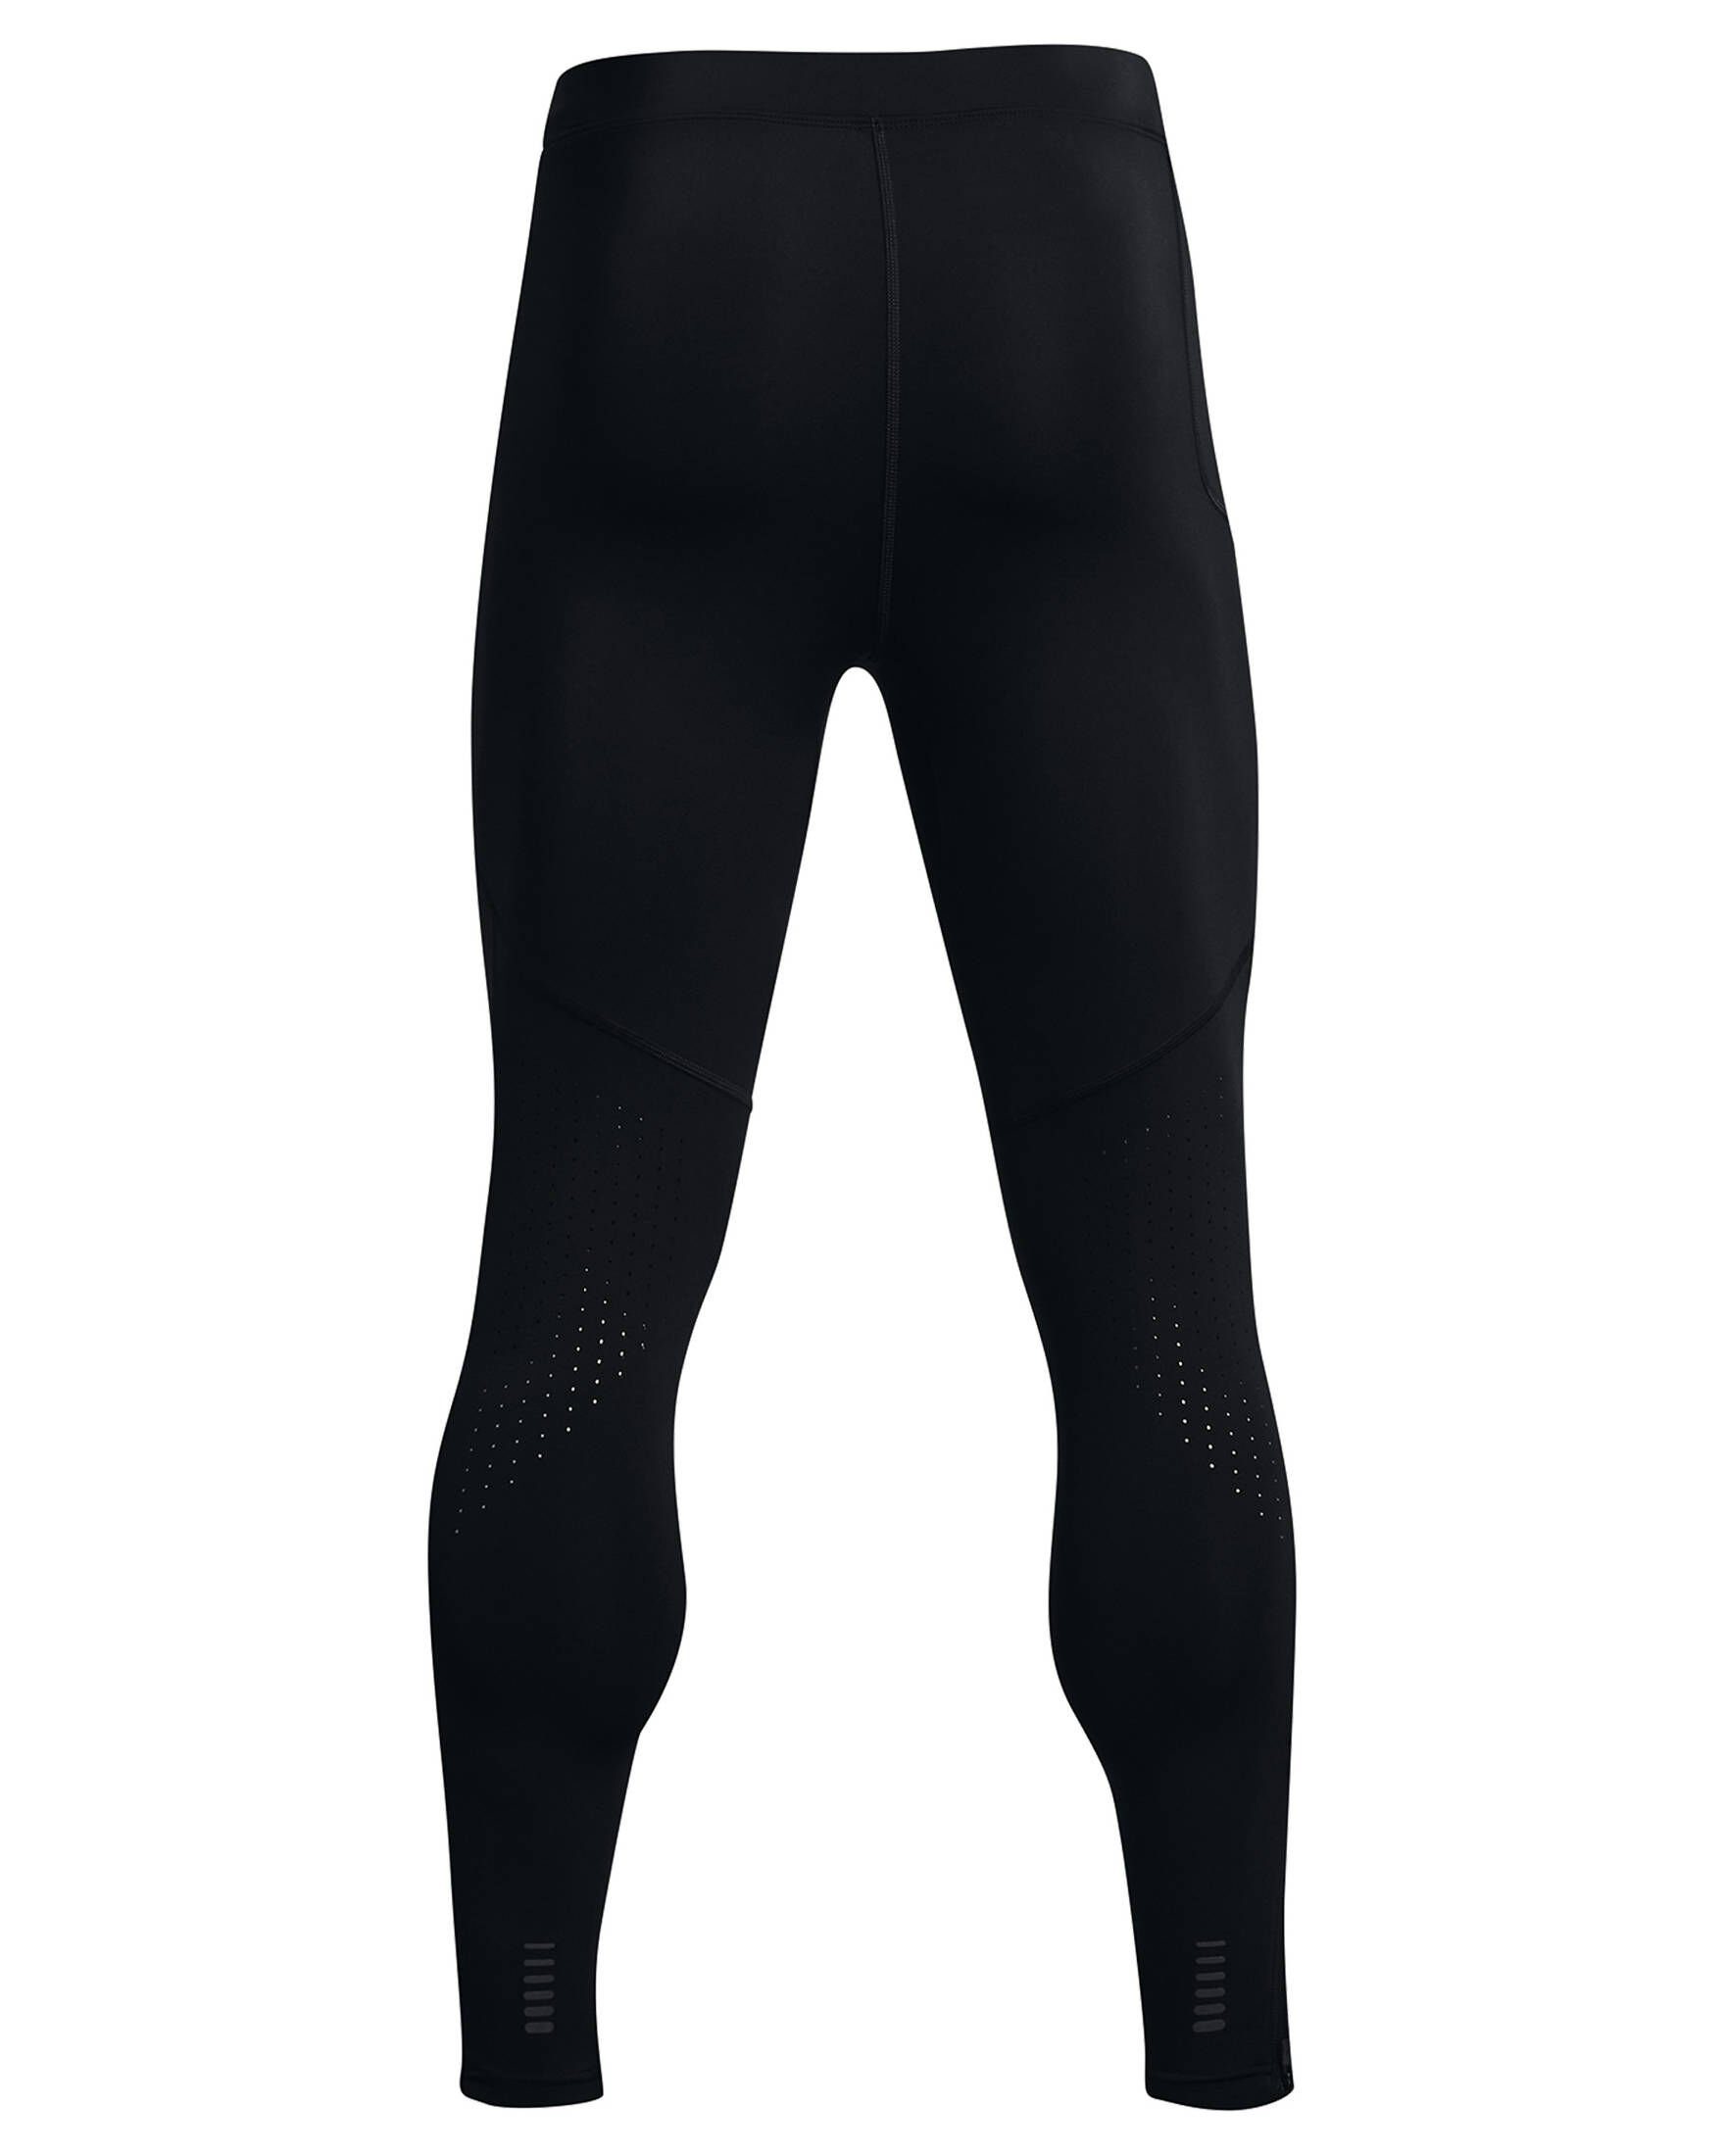 3.0 FAST Lauftights TIGHT Herren (1-tlg) Laufhose FLY Under Armour®